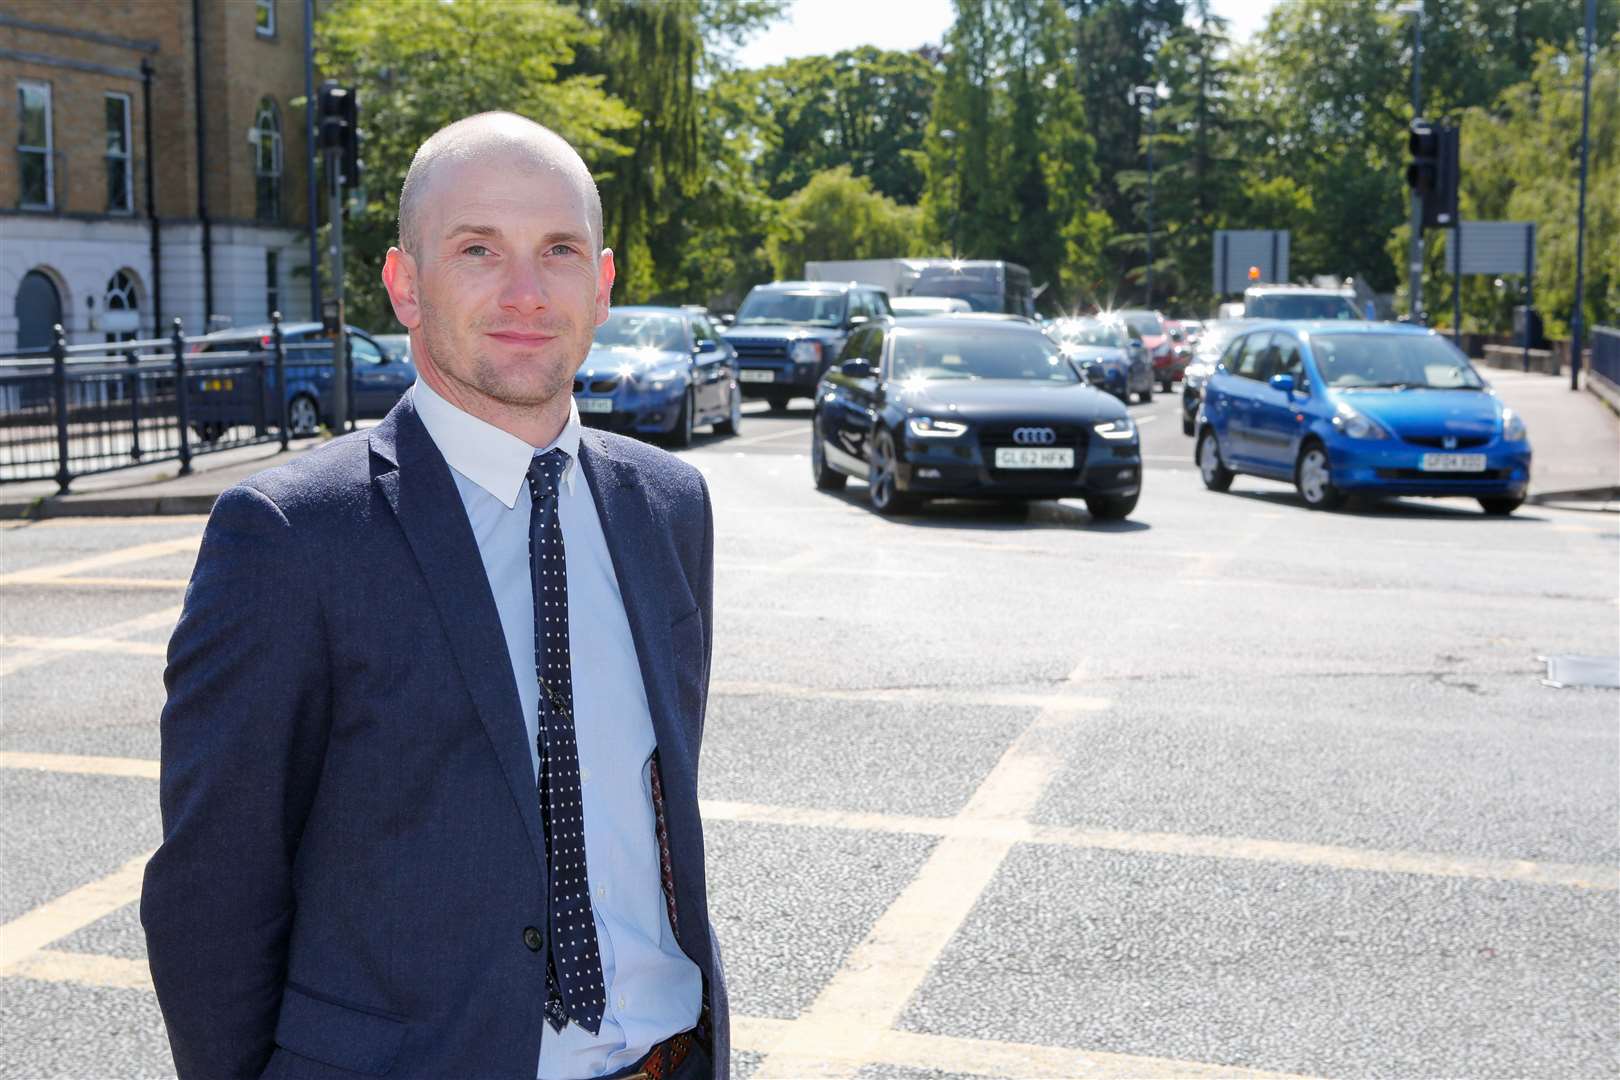 KCC project manager Russell Boorman oversaw construction of Maidstone's new gyratory system